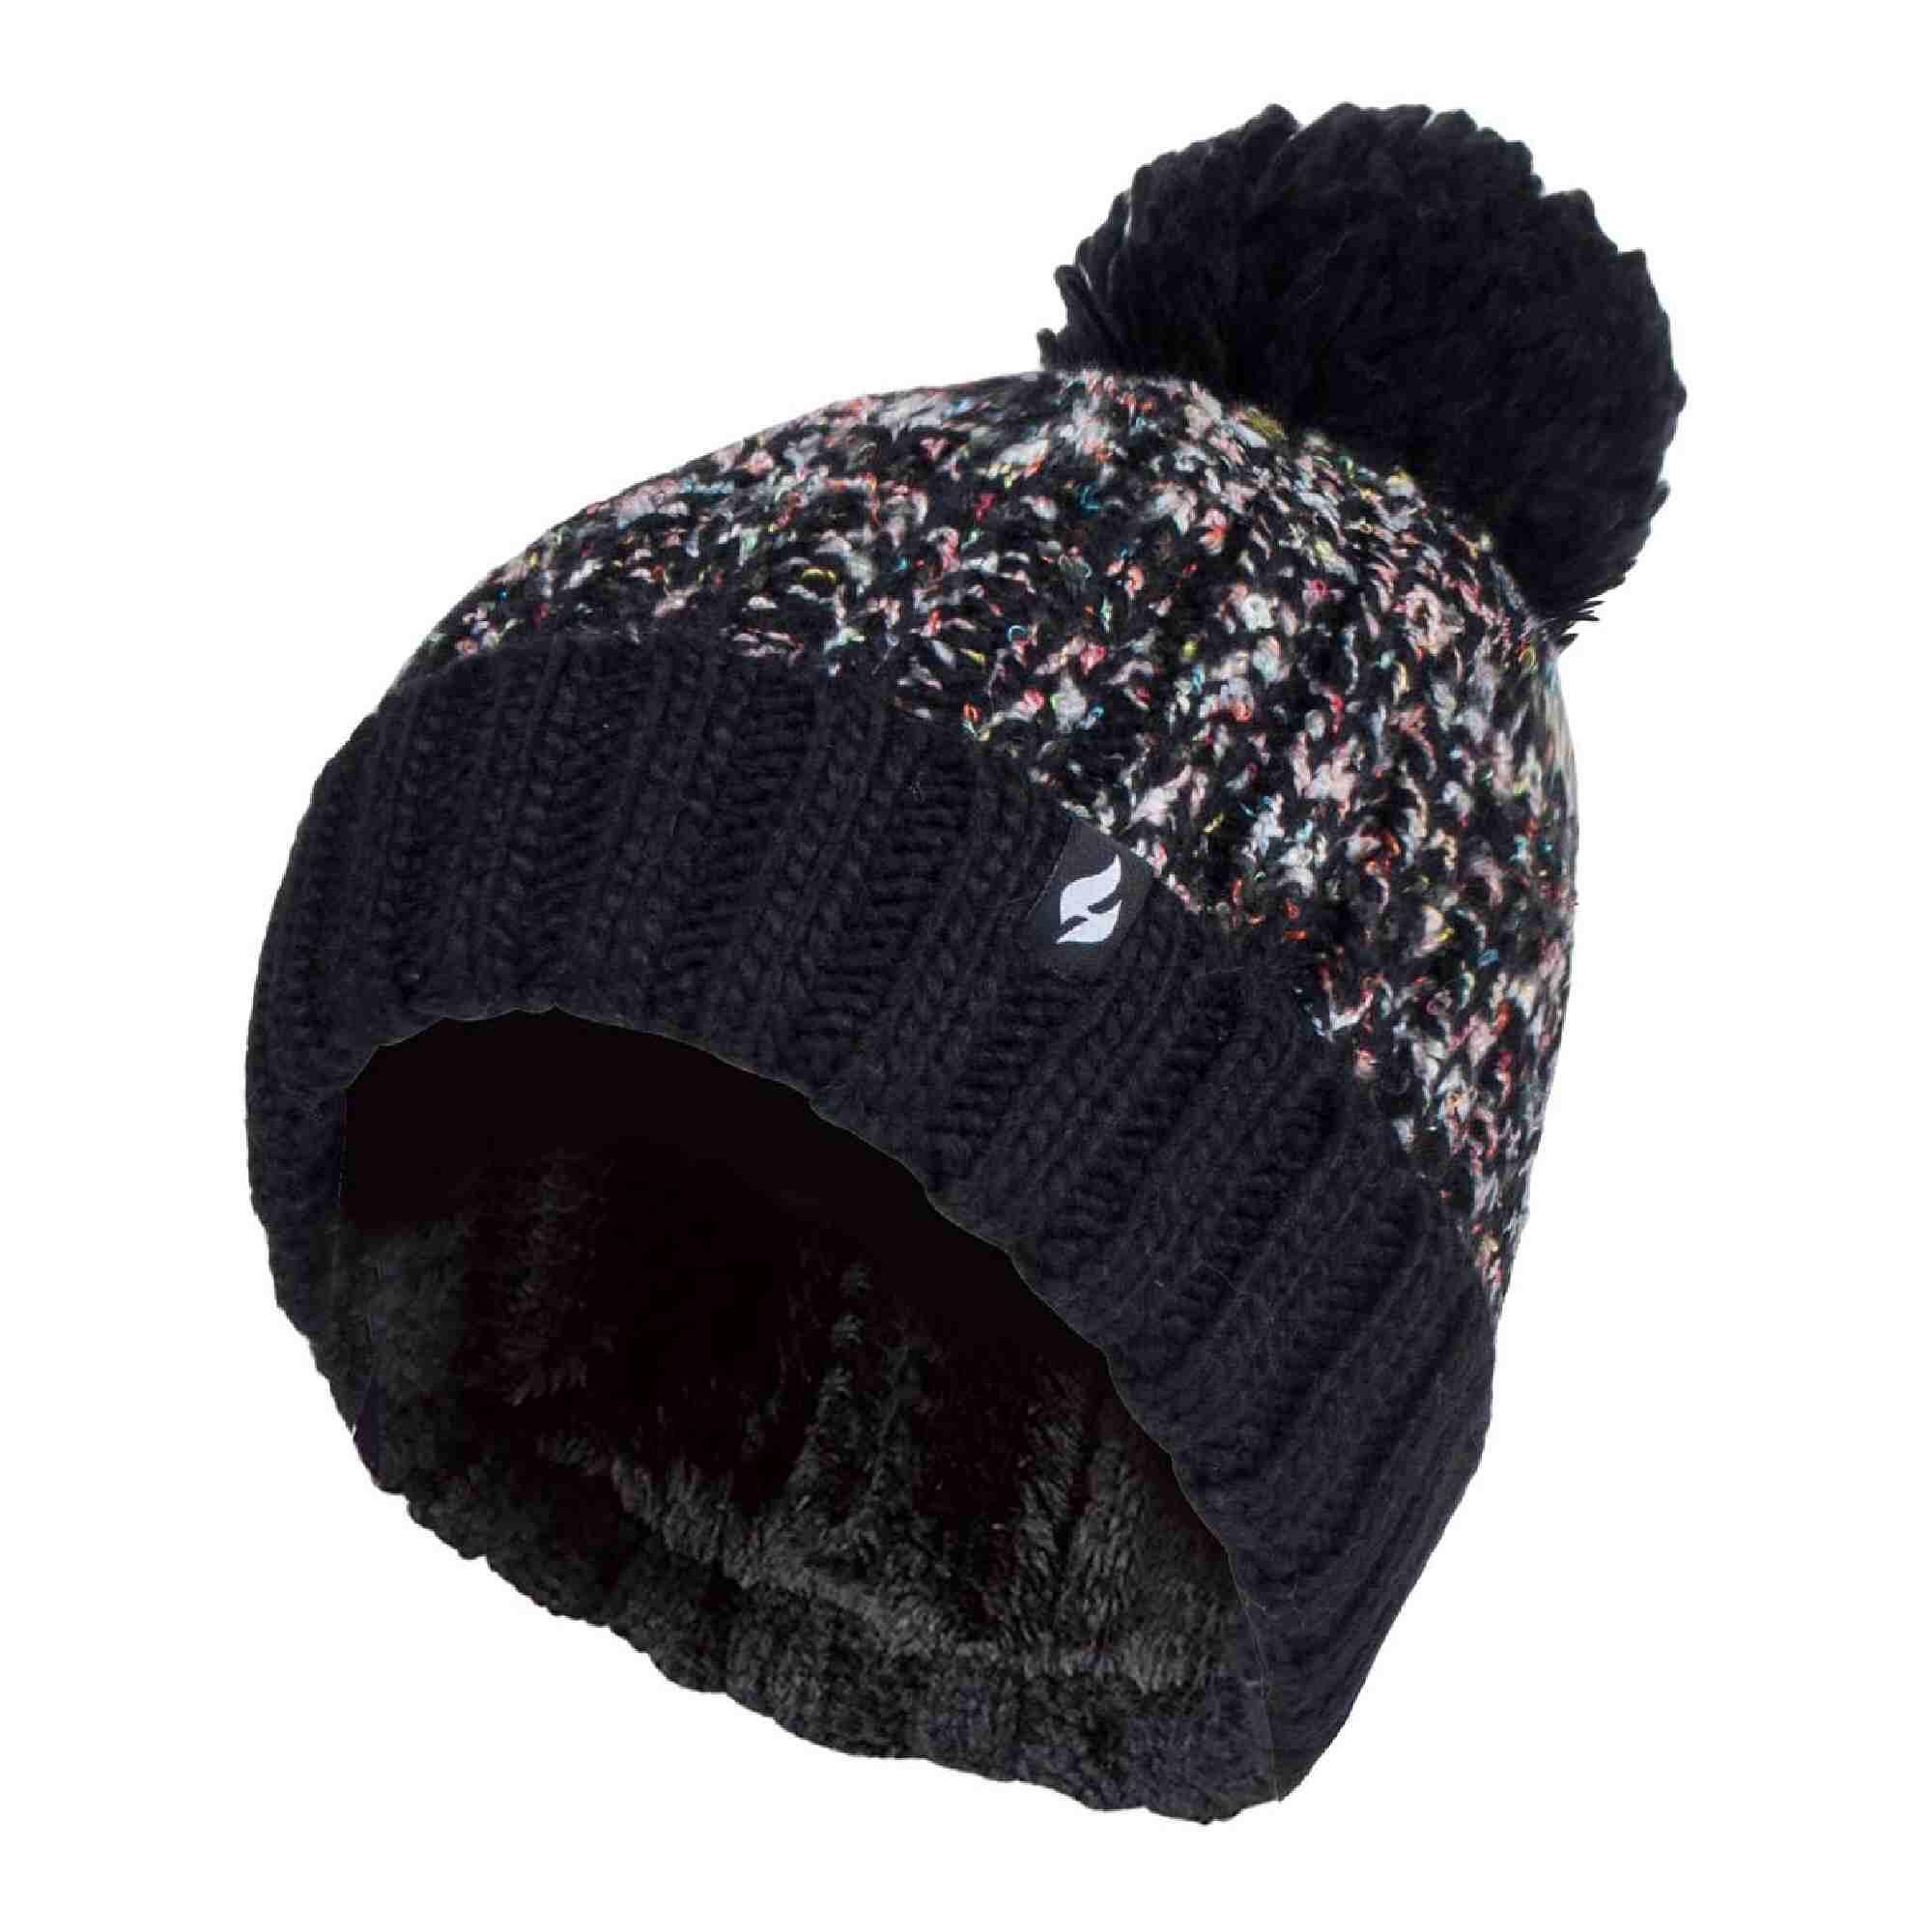 Ladies Thermal Winter Bobble Hat With Extra Large Pom Pom 1/7